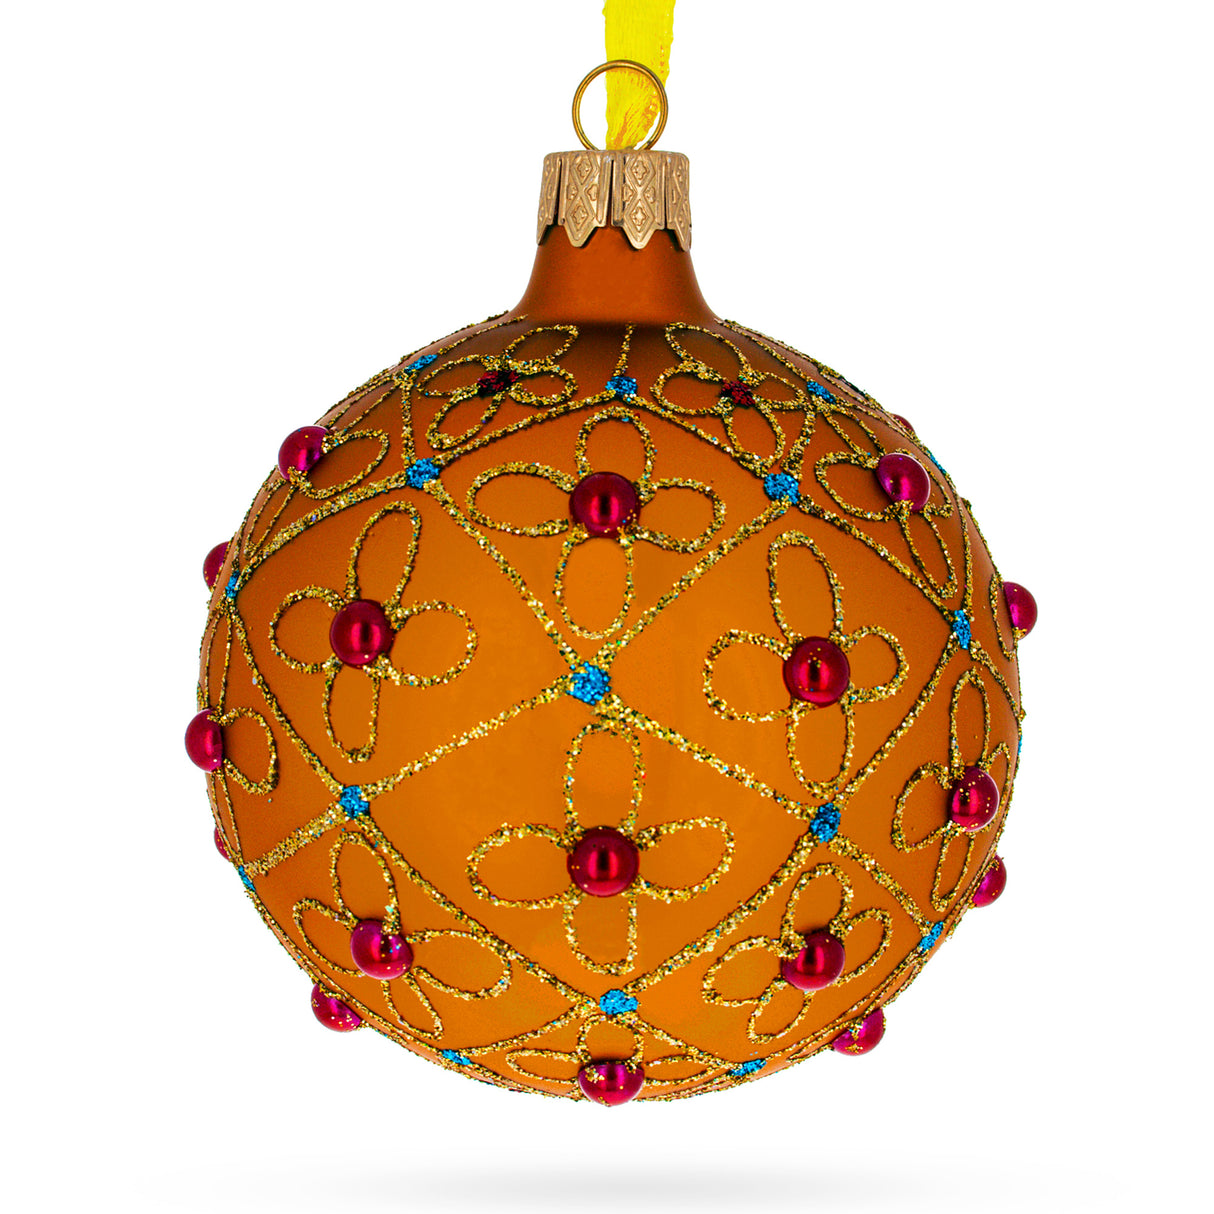 Luxurious Design: Jeweled Crosses on Gold Blown Glass Ball Christmas Ornament 3.25 Inches in Orange color, Round shape